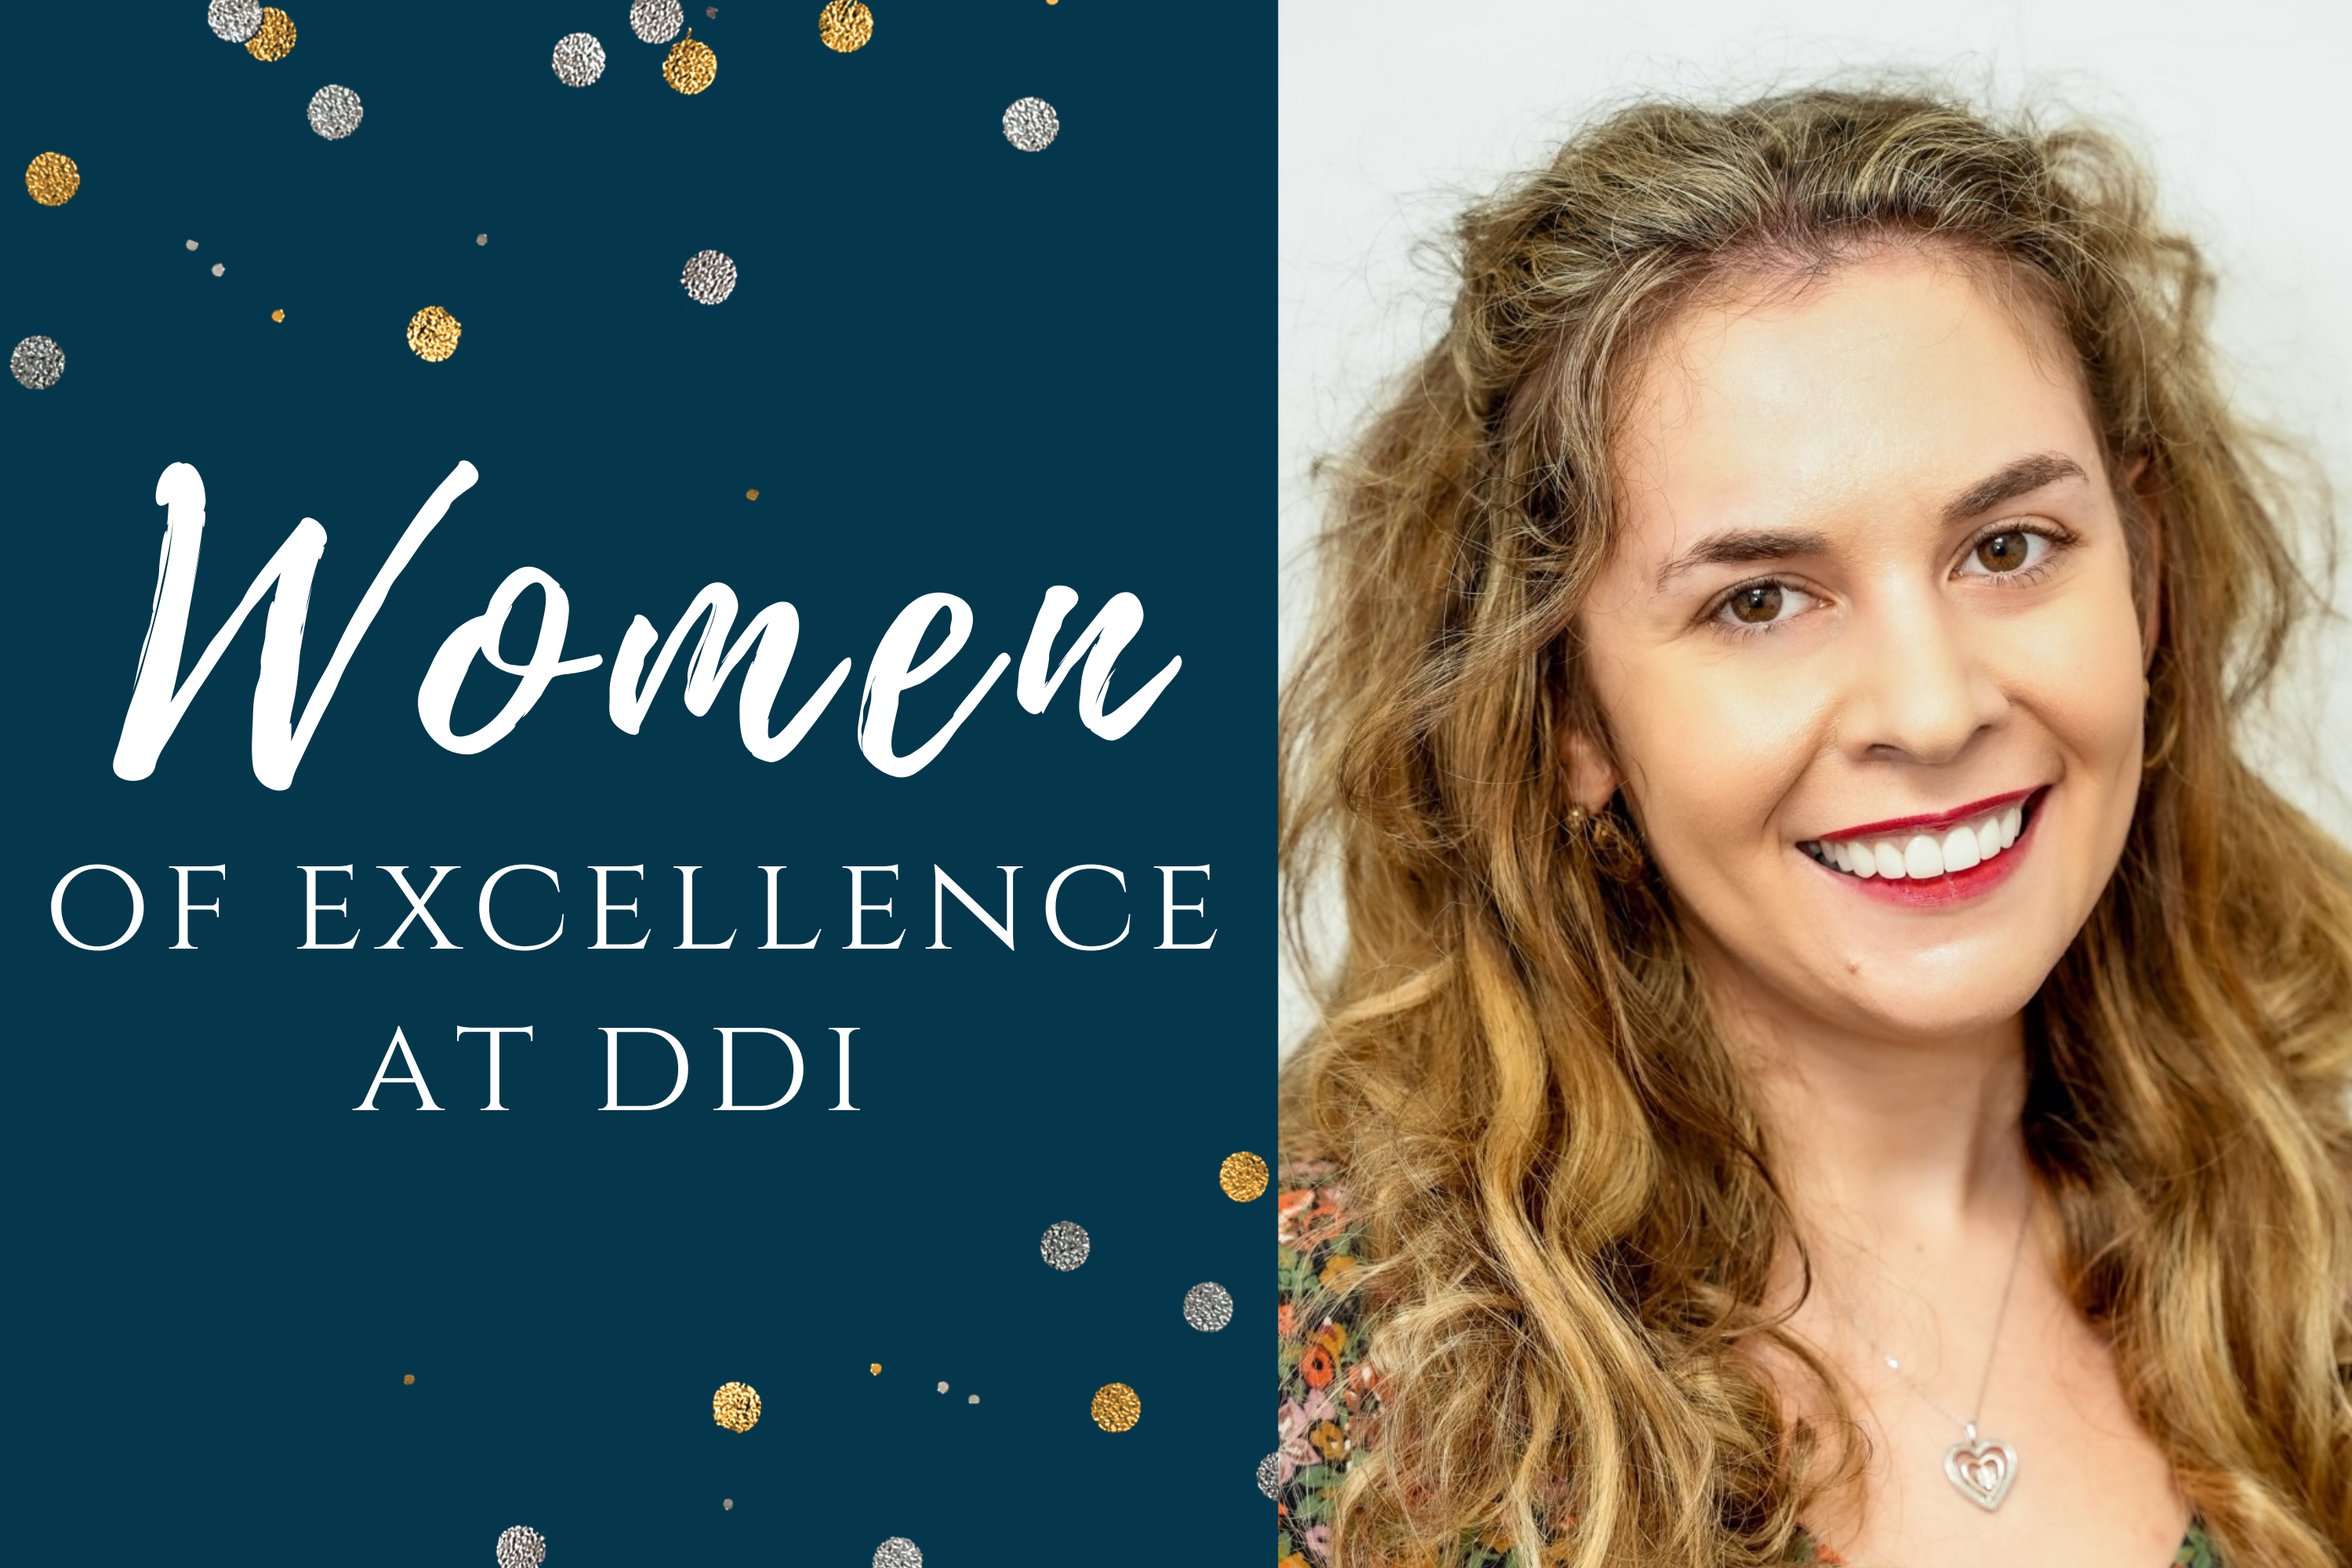 At the close of Women’s History Month in March, we decided that because so many talented women are making history right here at DDI every day, we would honor a year-long celebration of Women of Excellence at DDI.